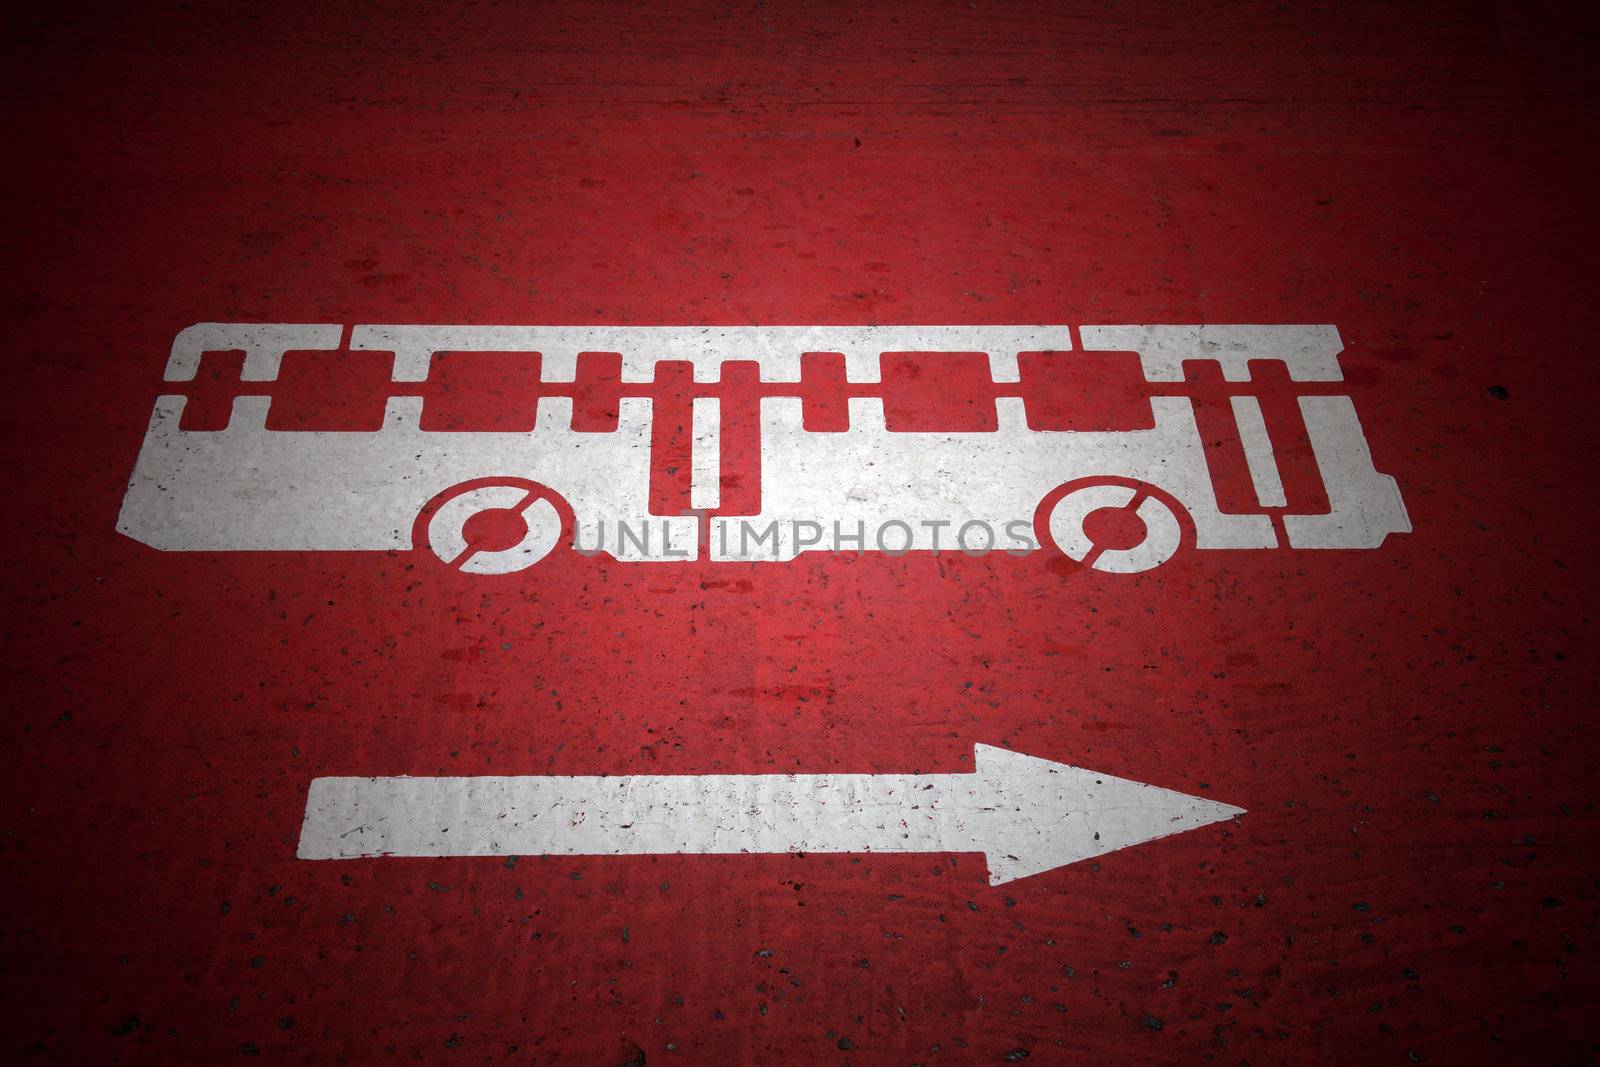  Bus and traffic direction sign painted on red asphalt road